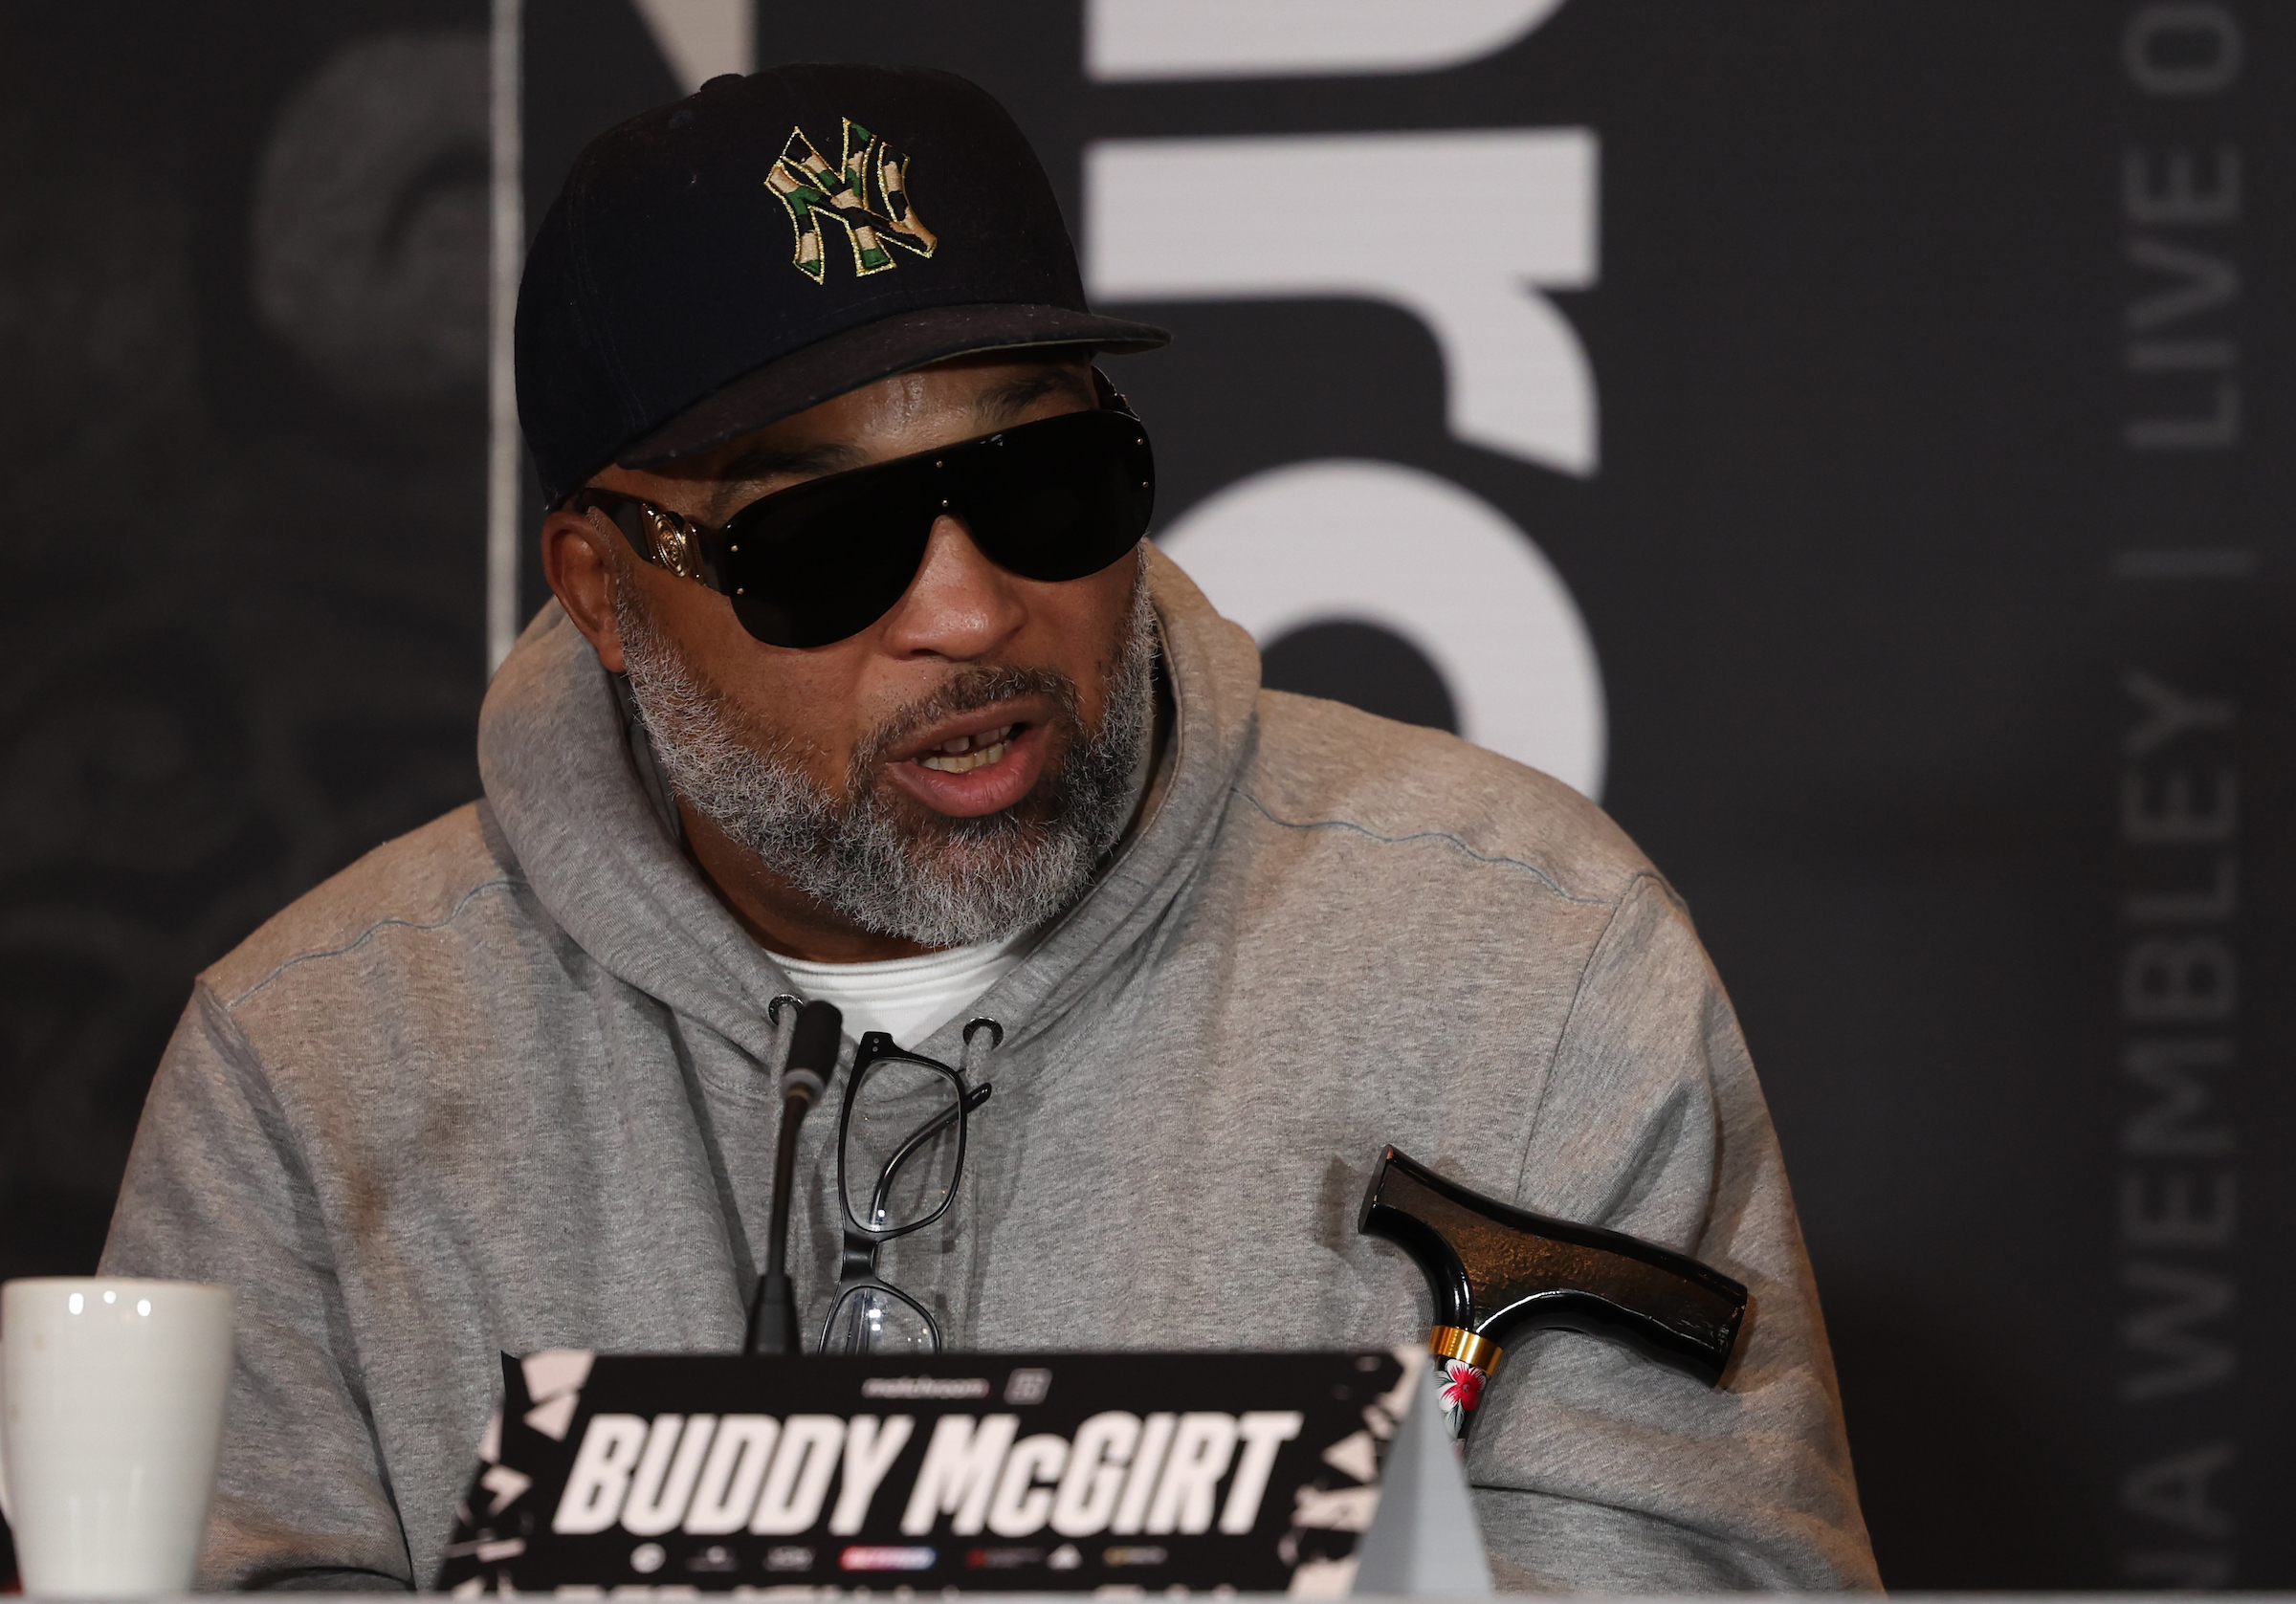 Trainer McGirt: "I stand by Dillian" following Whyte testing failure